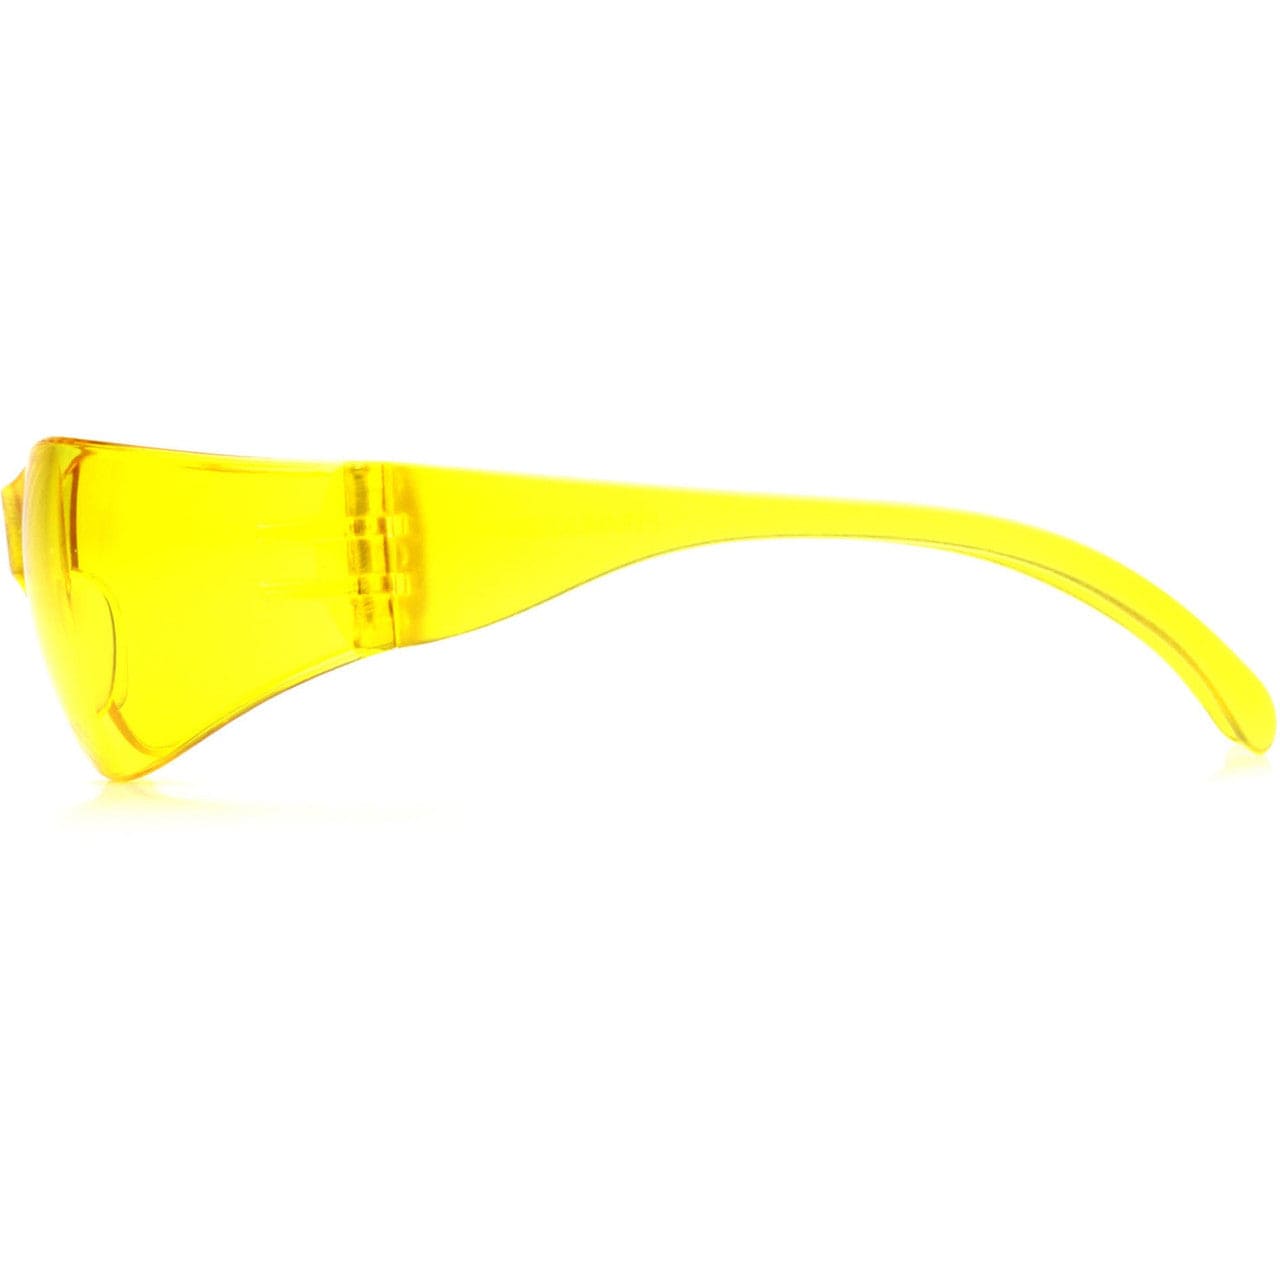 Pyramex Intruder Safety Glasses with Amber Lens